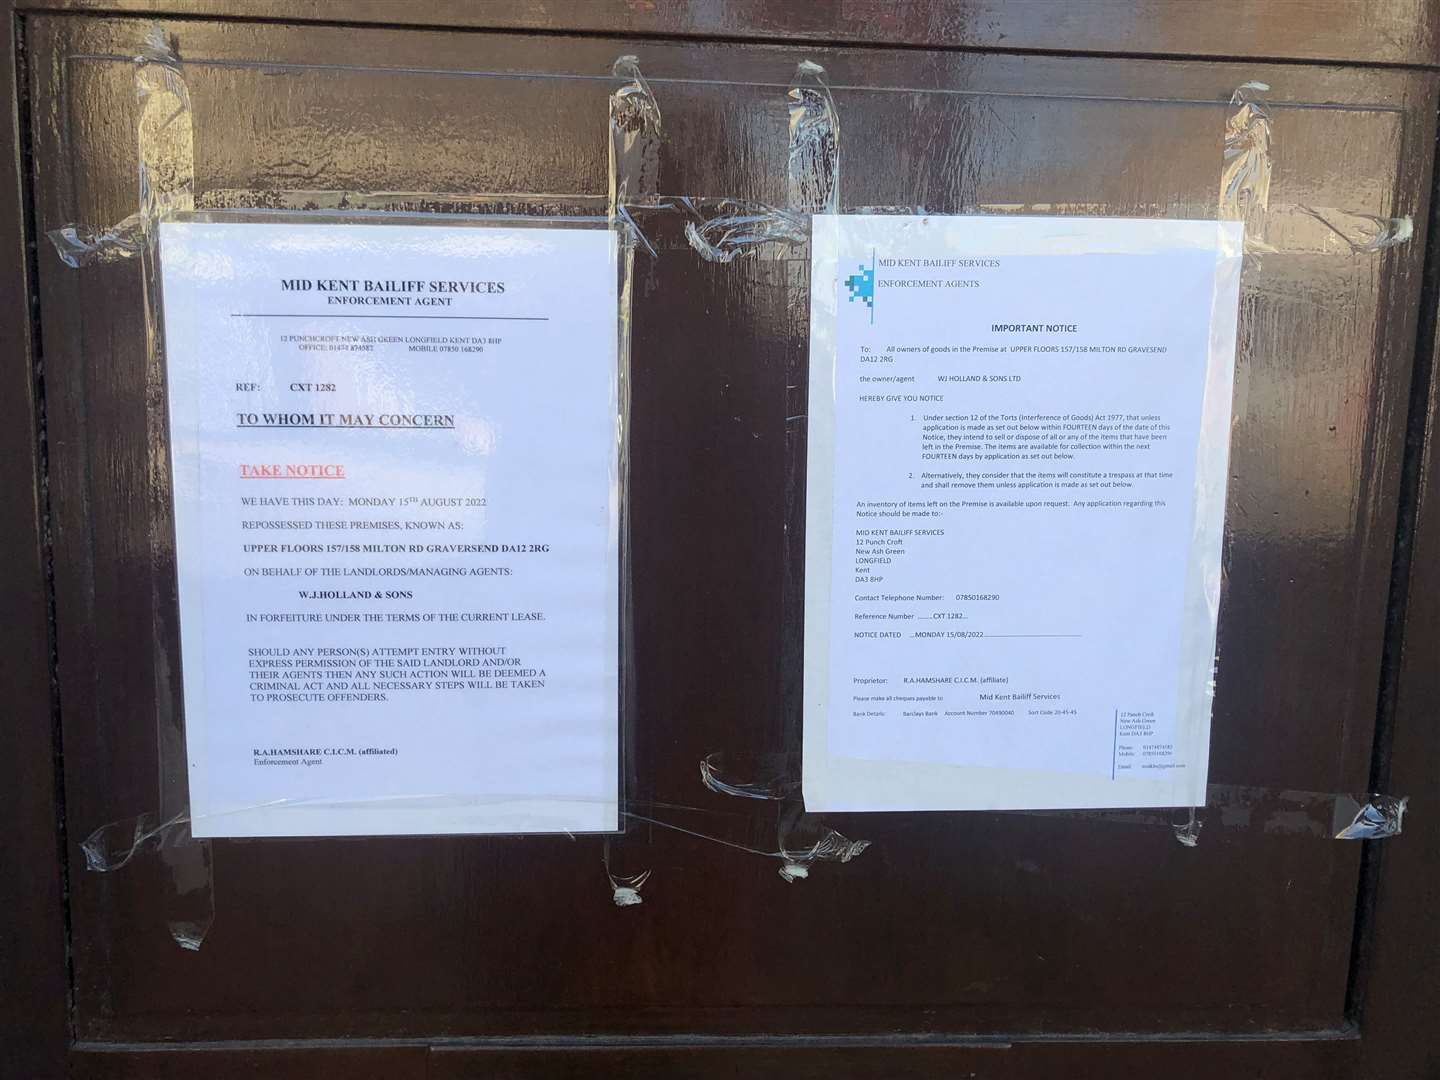 Repossession notices were posted on the door in August 2022